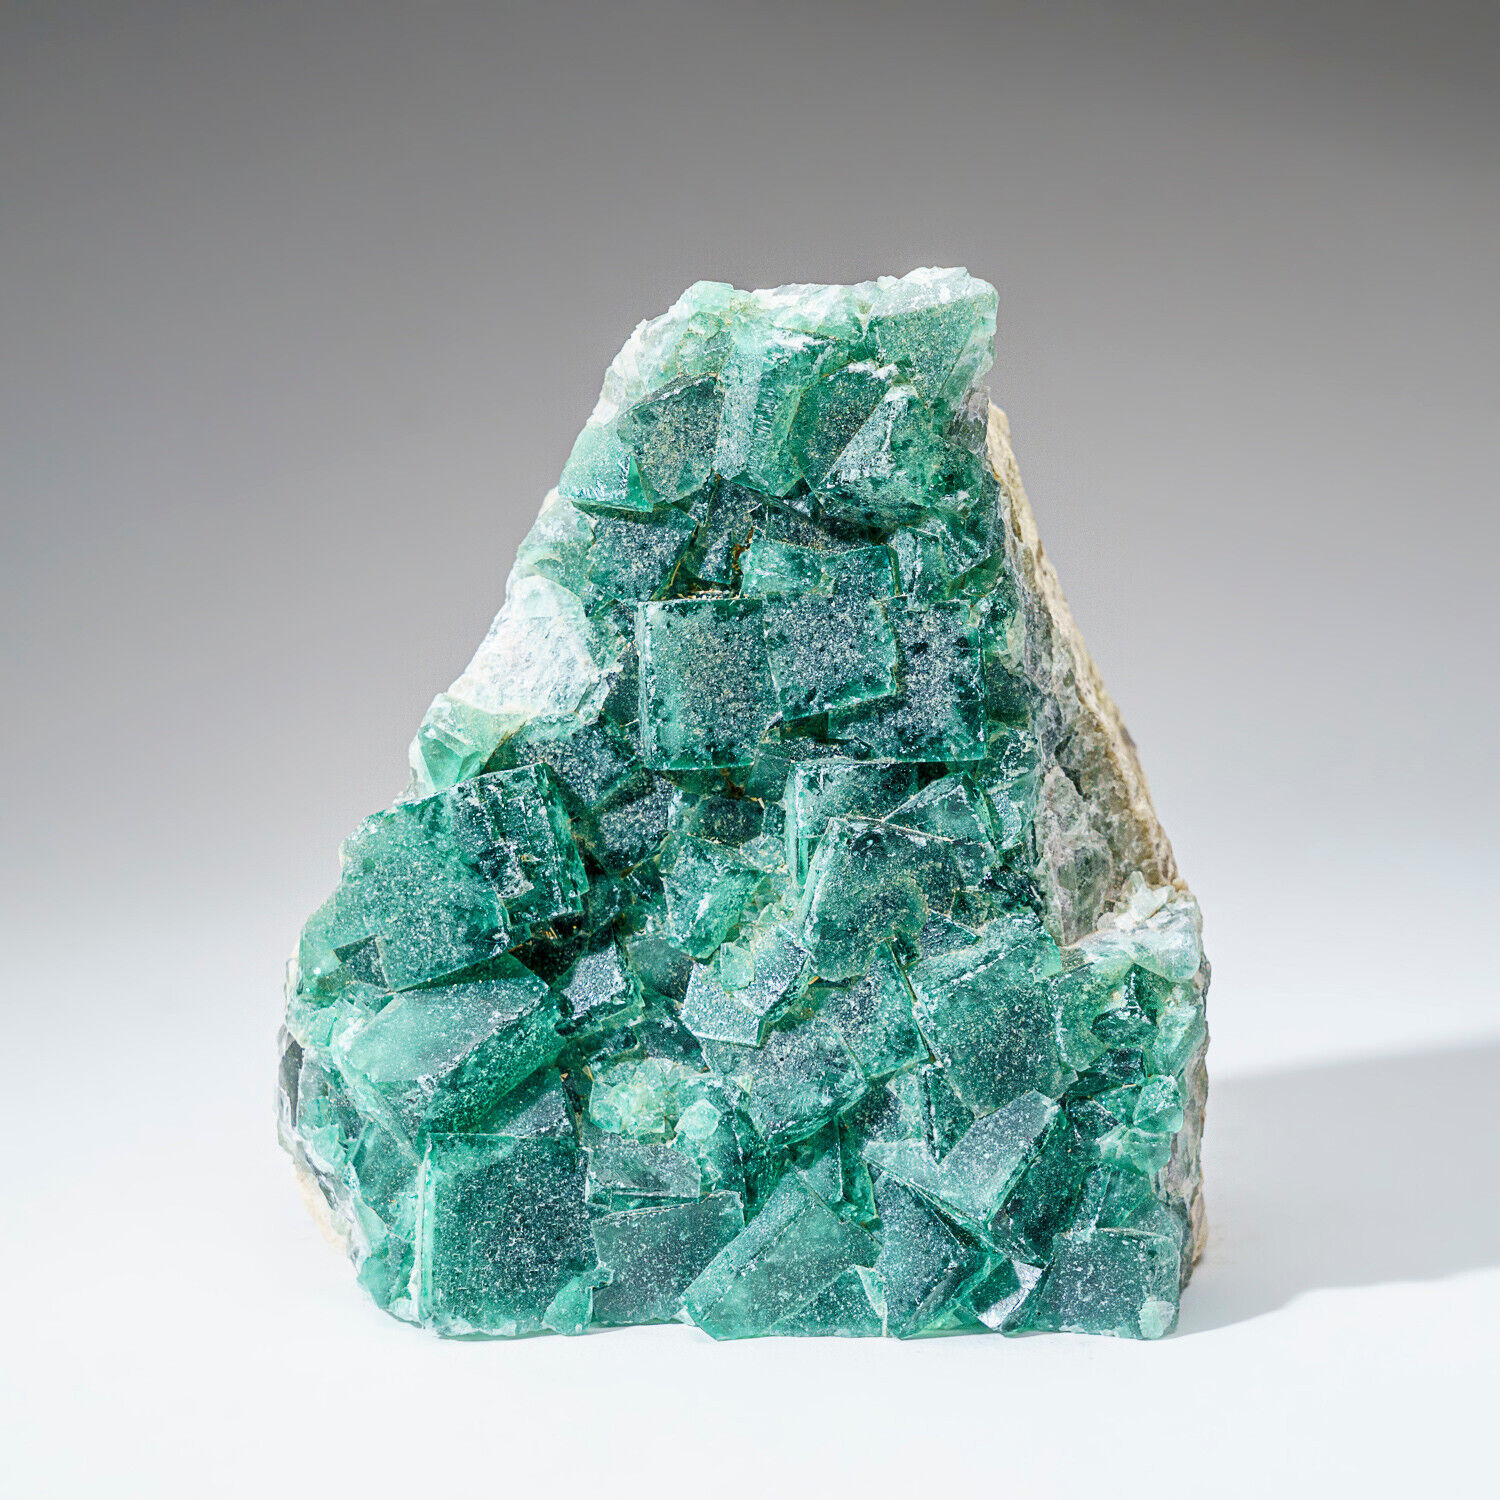 Genuine Green Fluorite from Namibia (3.25 lbs)